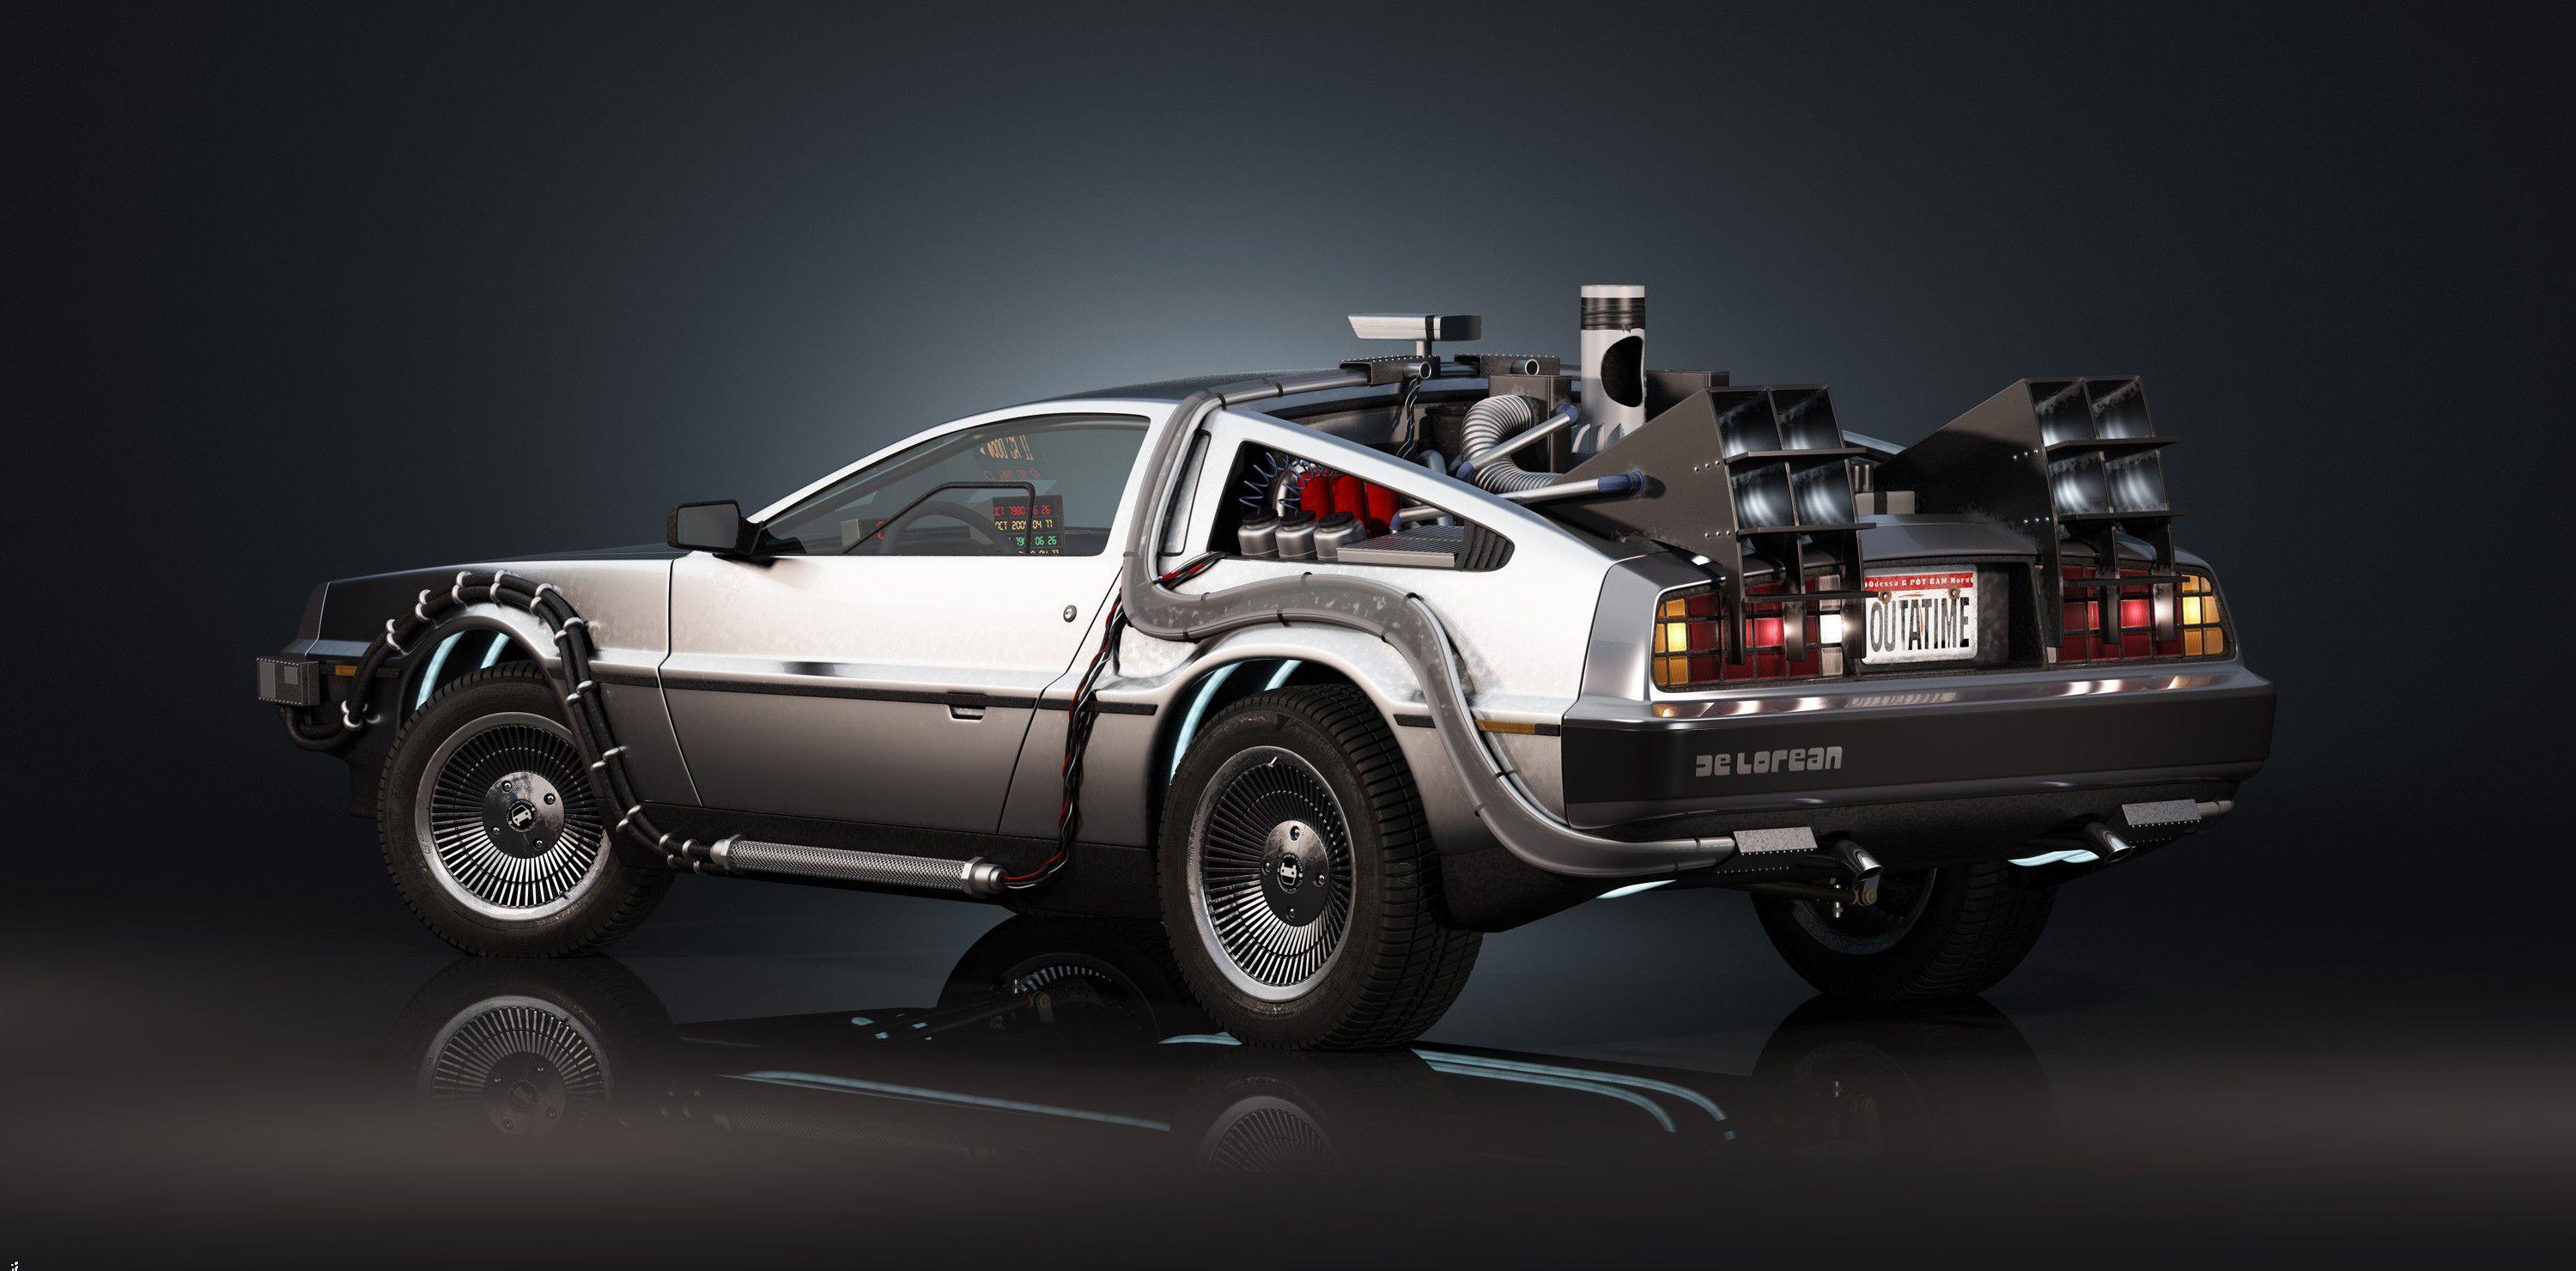 free image HD back to the future download high definiton wallpaper